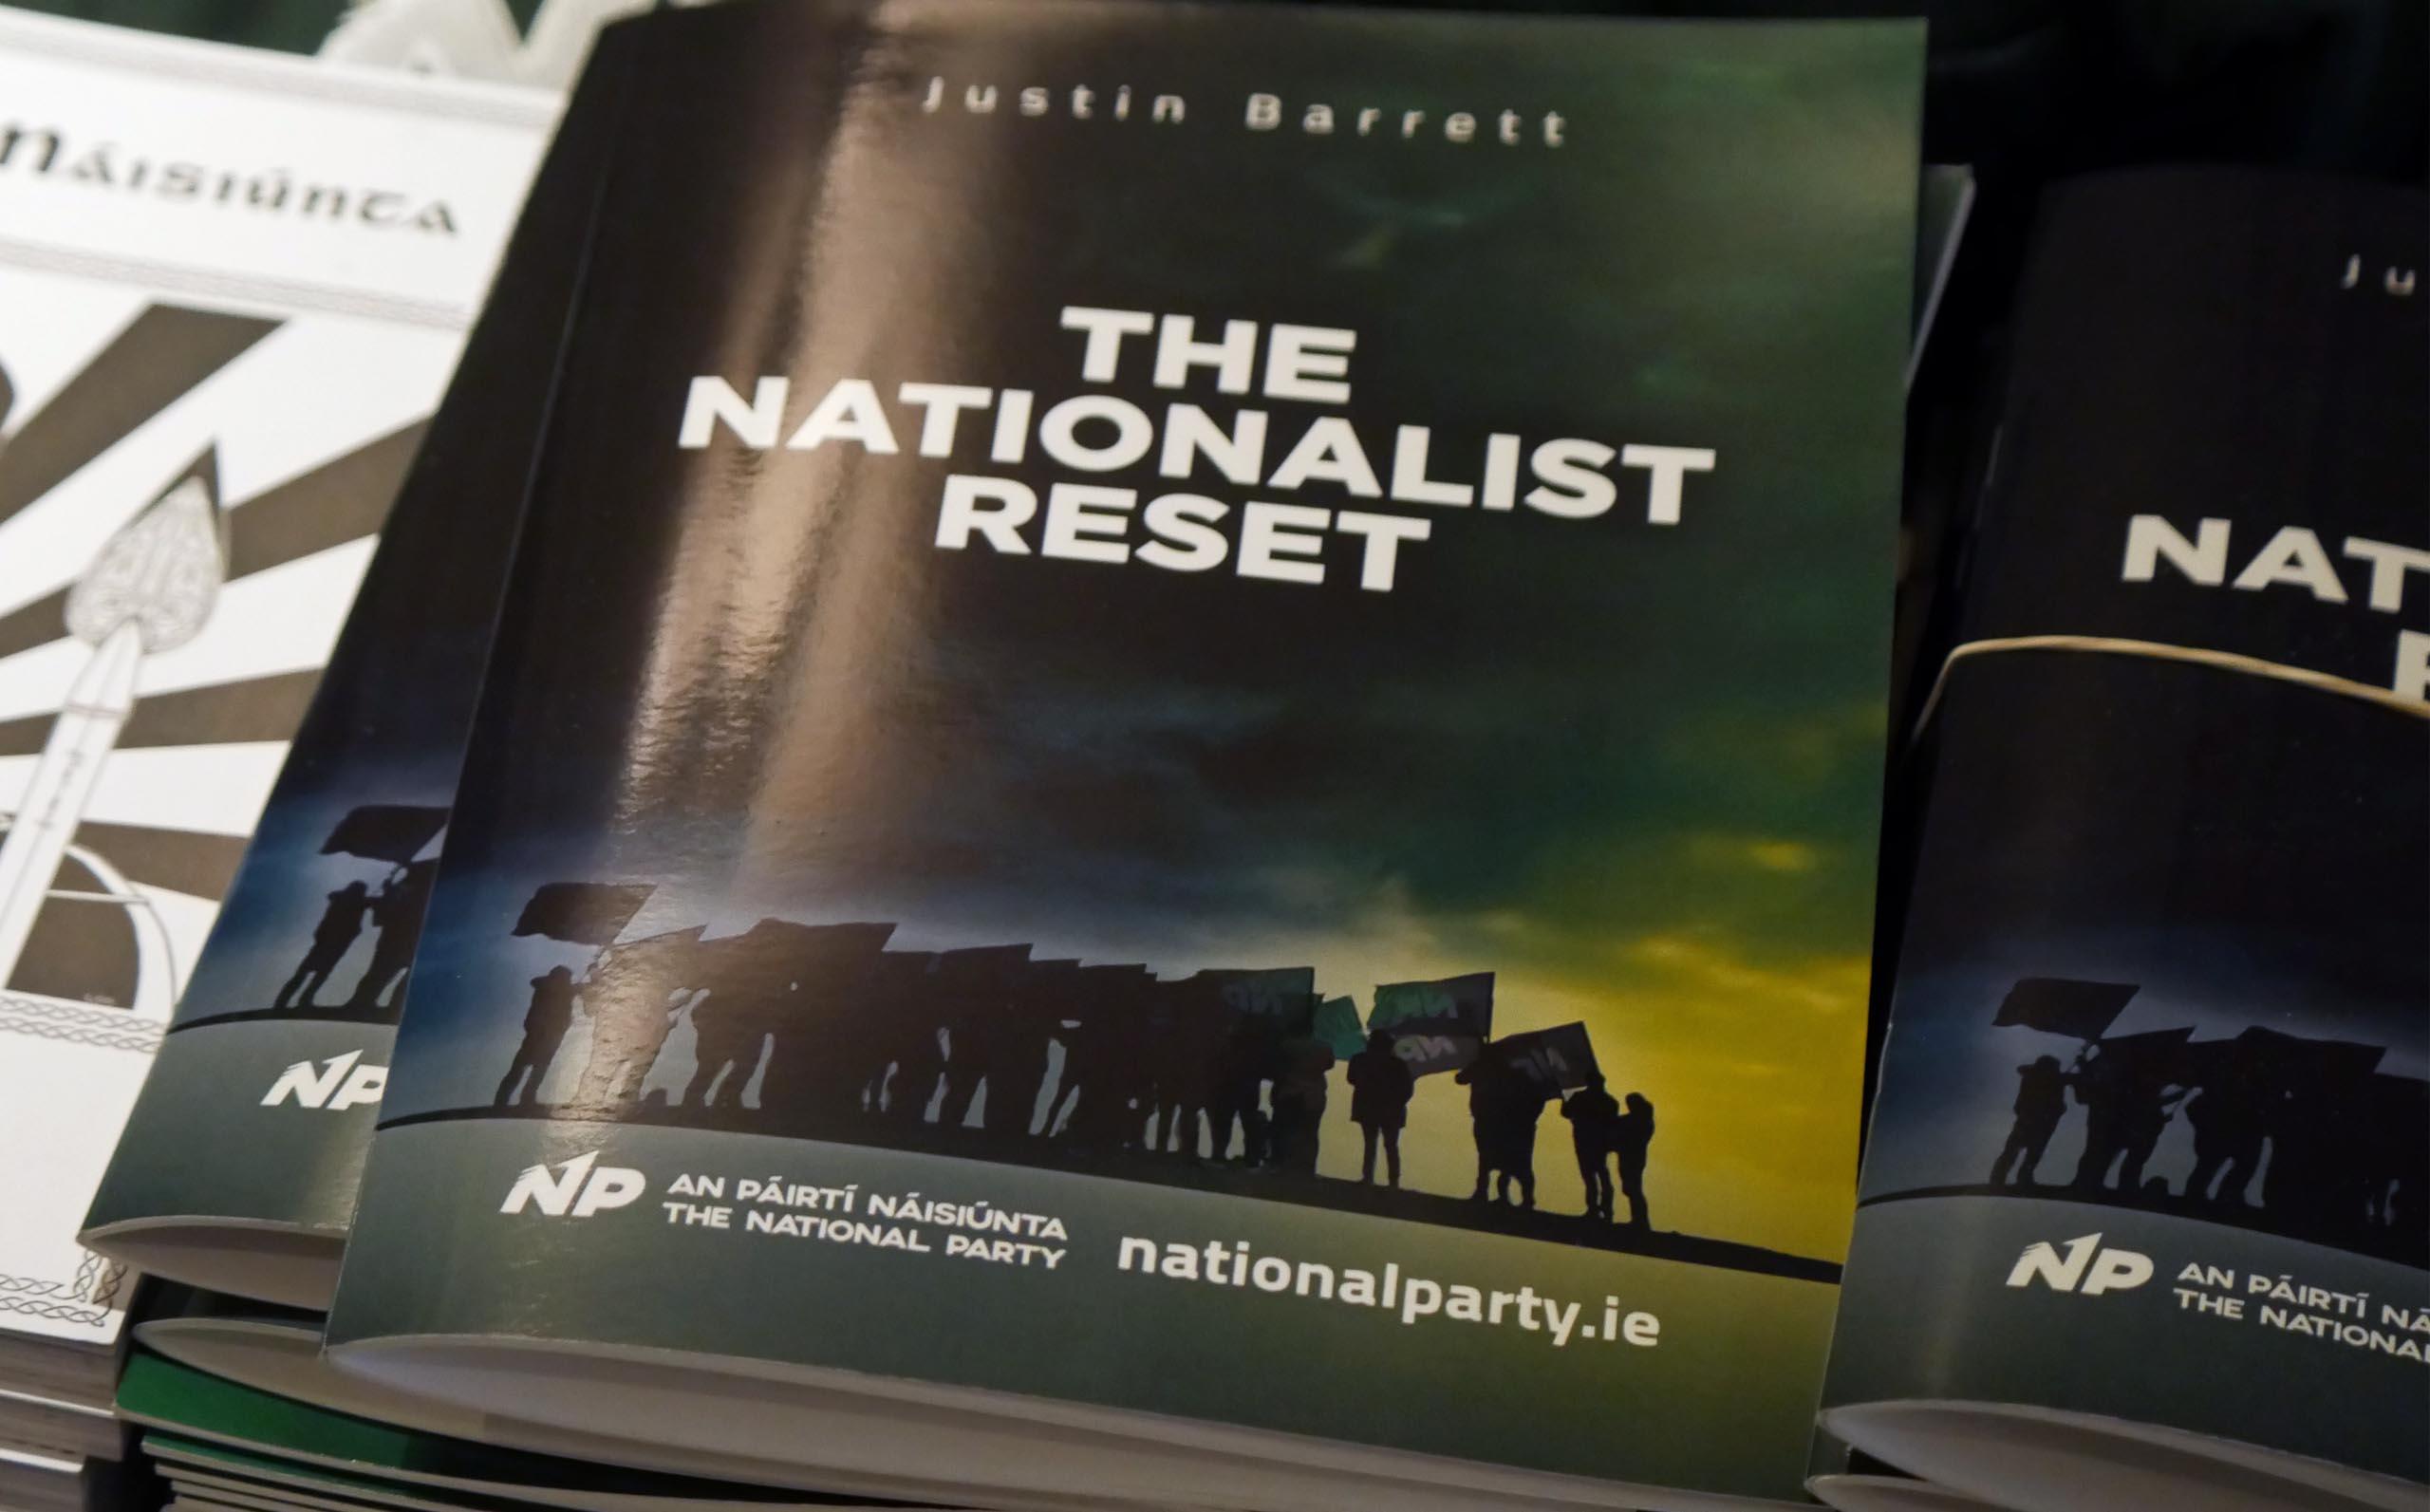 The Nationalist Reset